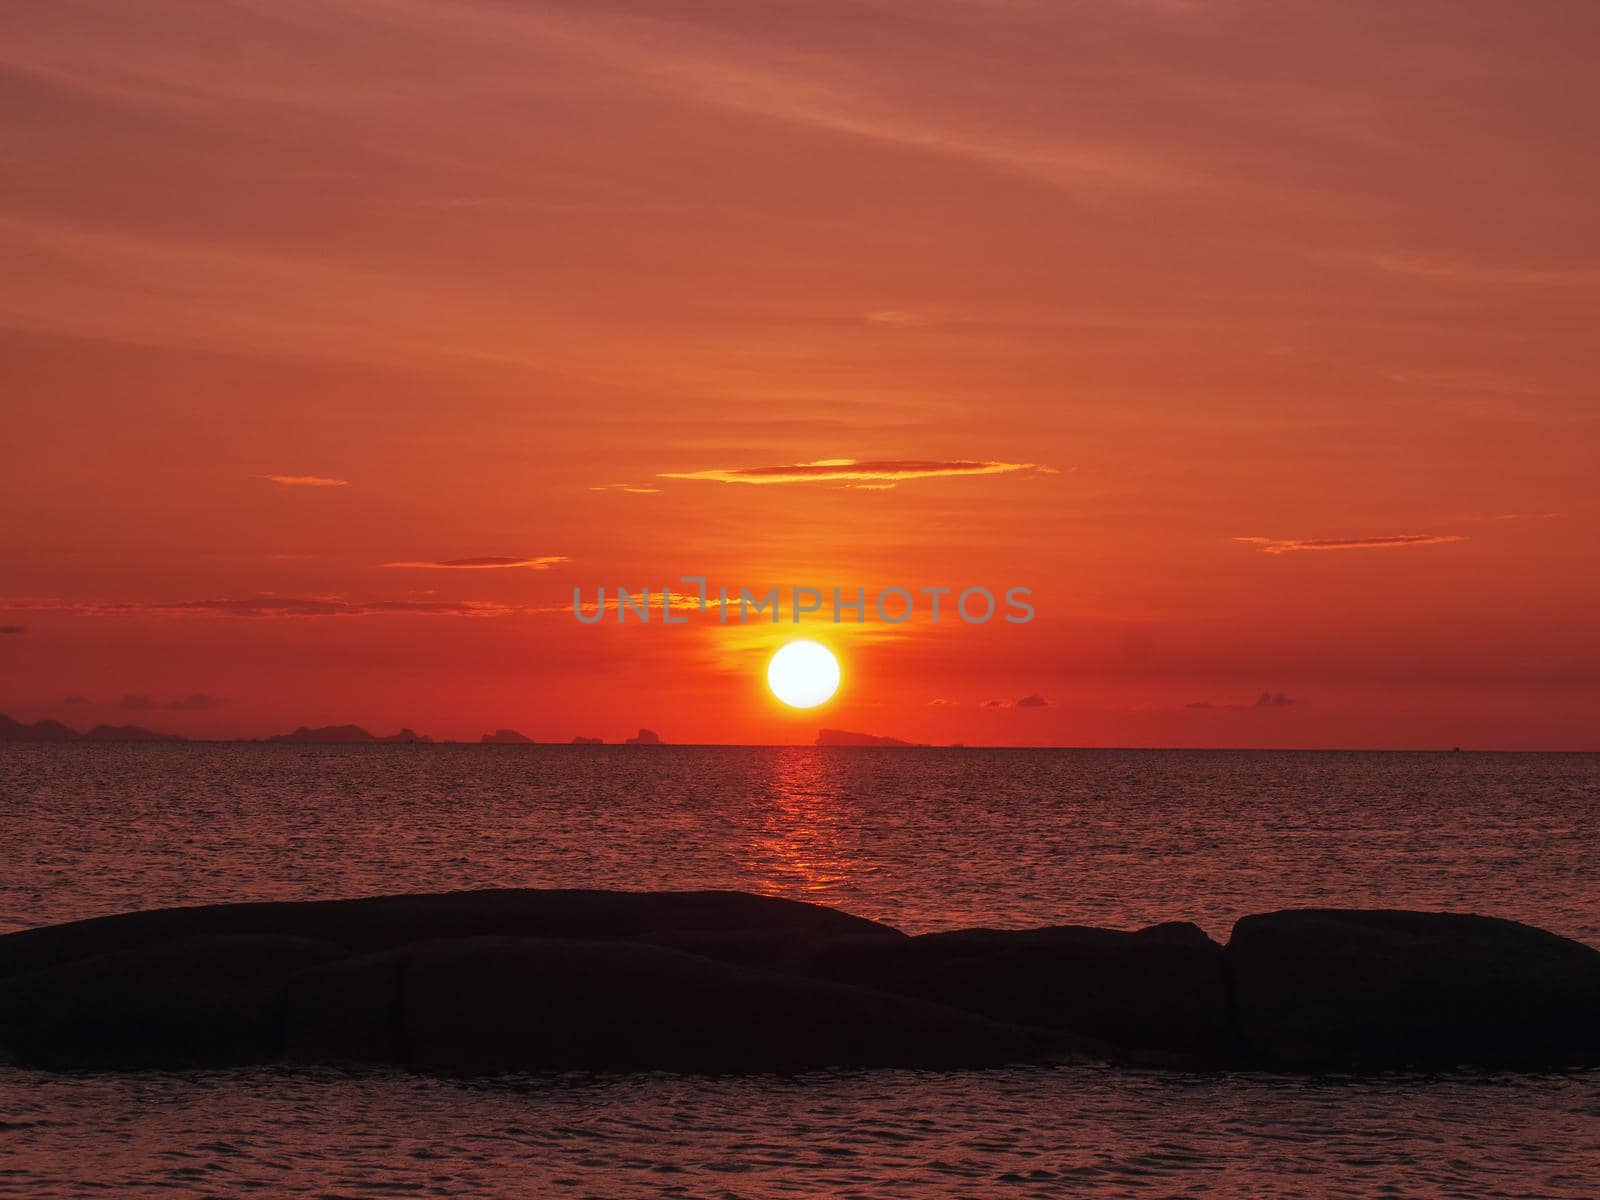 Beautiful red sunset above the sea. photo by Andre1ns